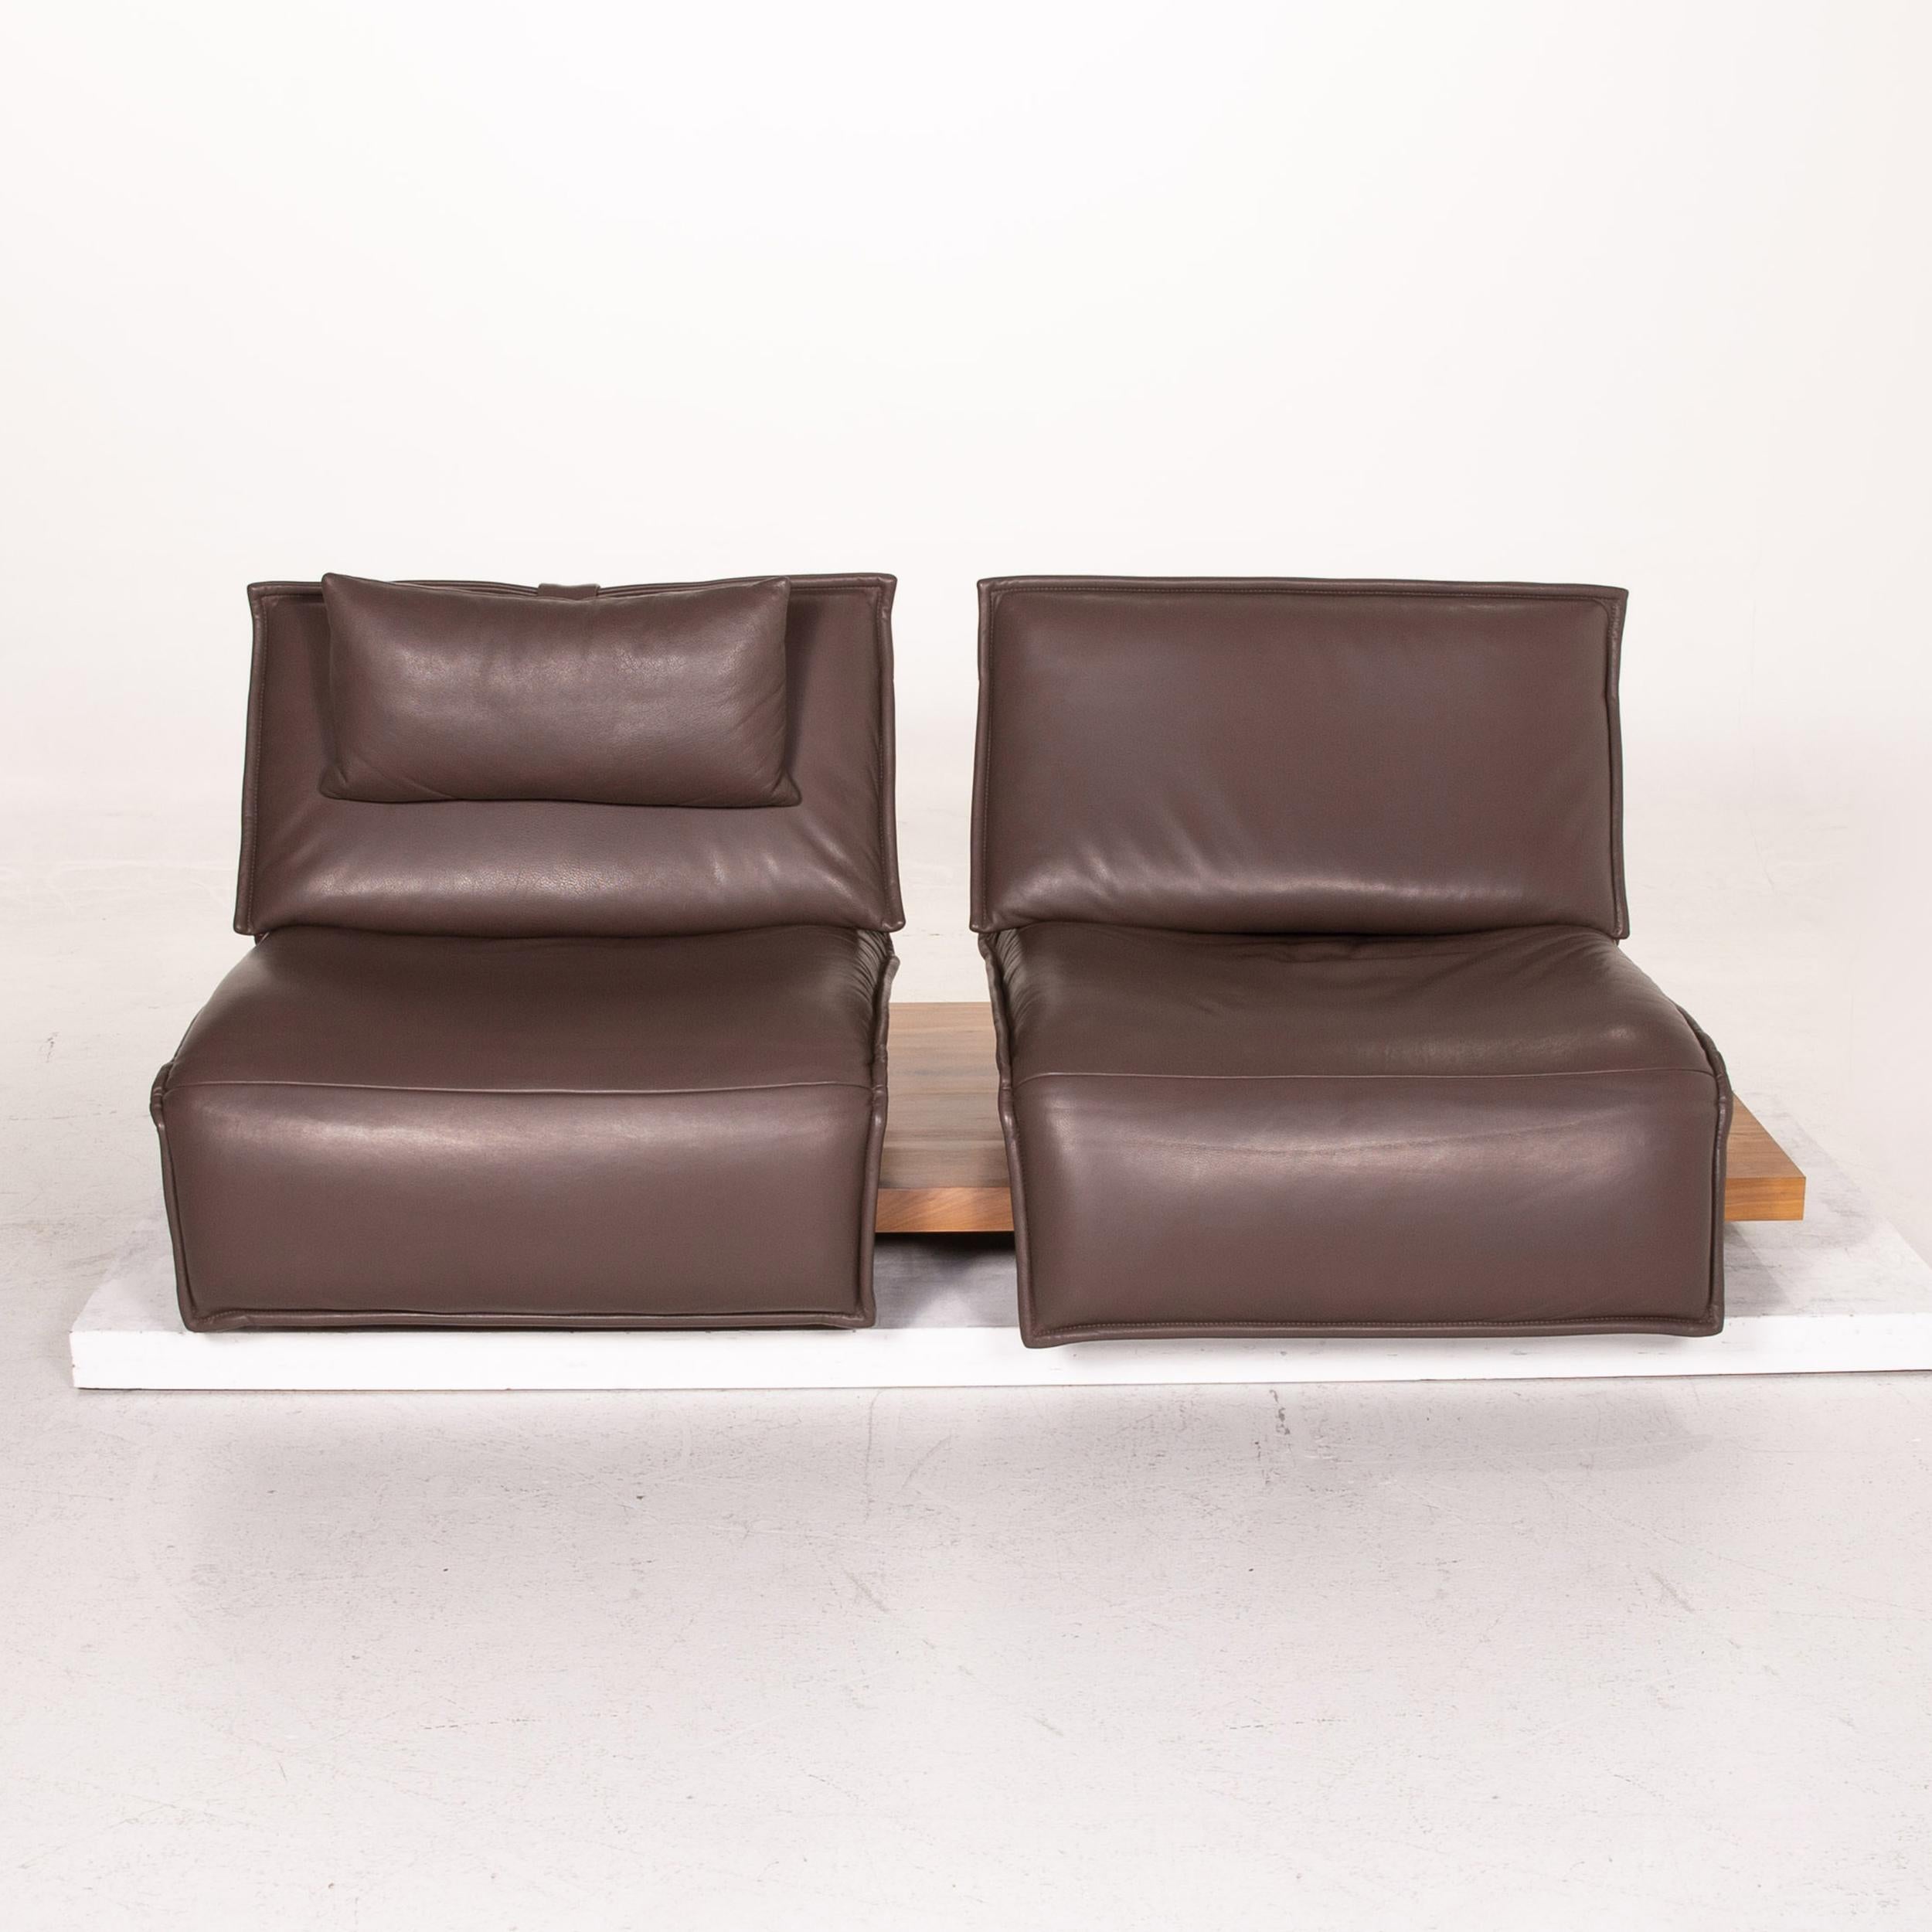 Contemporary Koinor Free Motion Edit Leather Sofa Dark Brown Two-Seat Incl. Electr. Relax